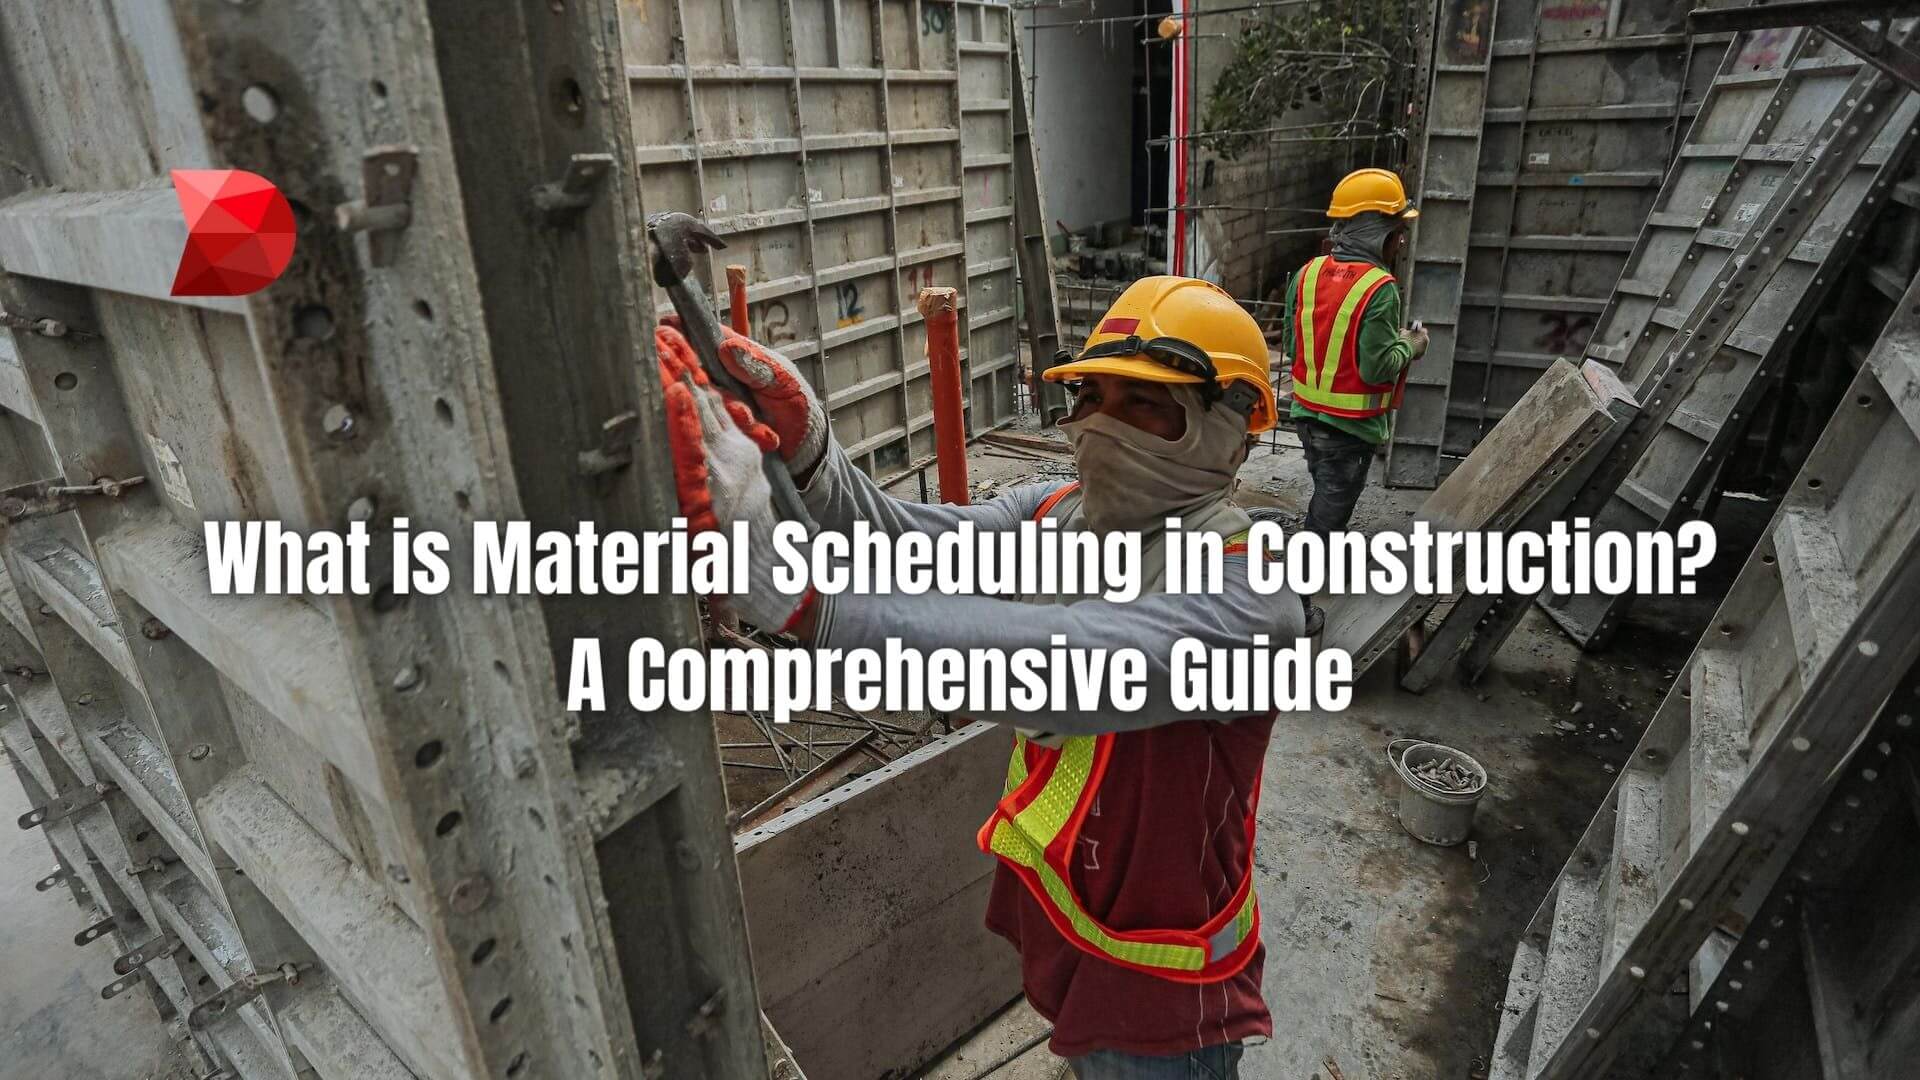 Maximize construction project success with our material scheduling guide. Learn essential strategies for timely and cost-effective outcomes.